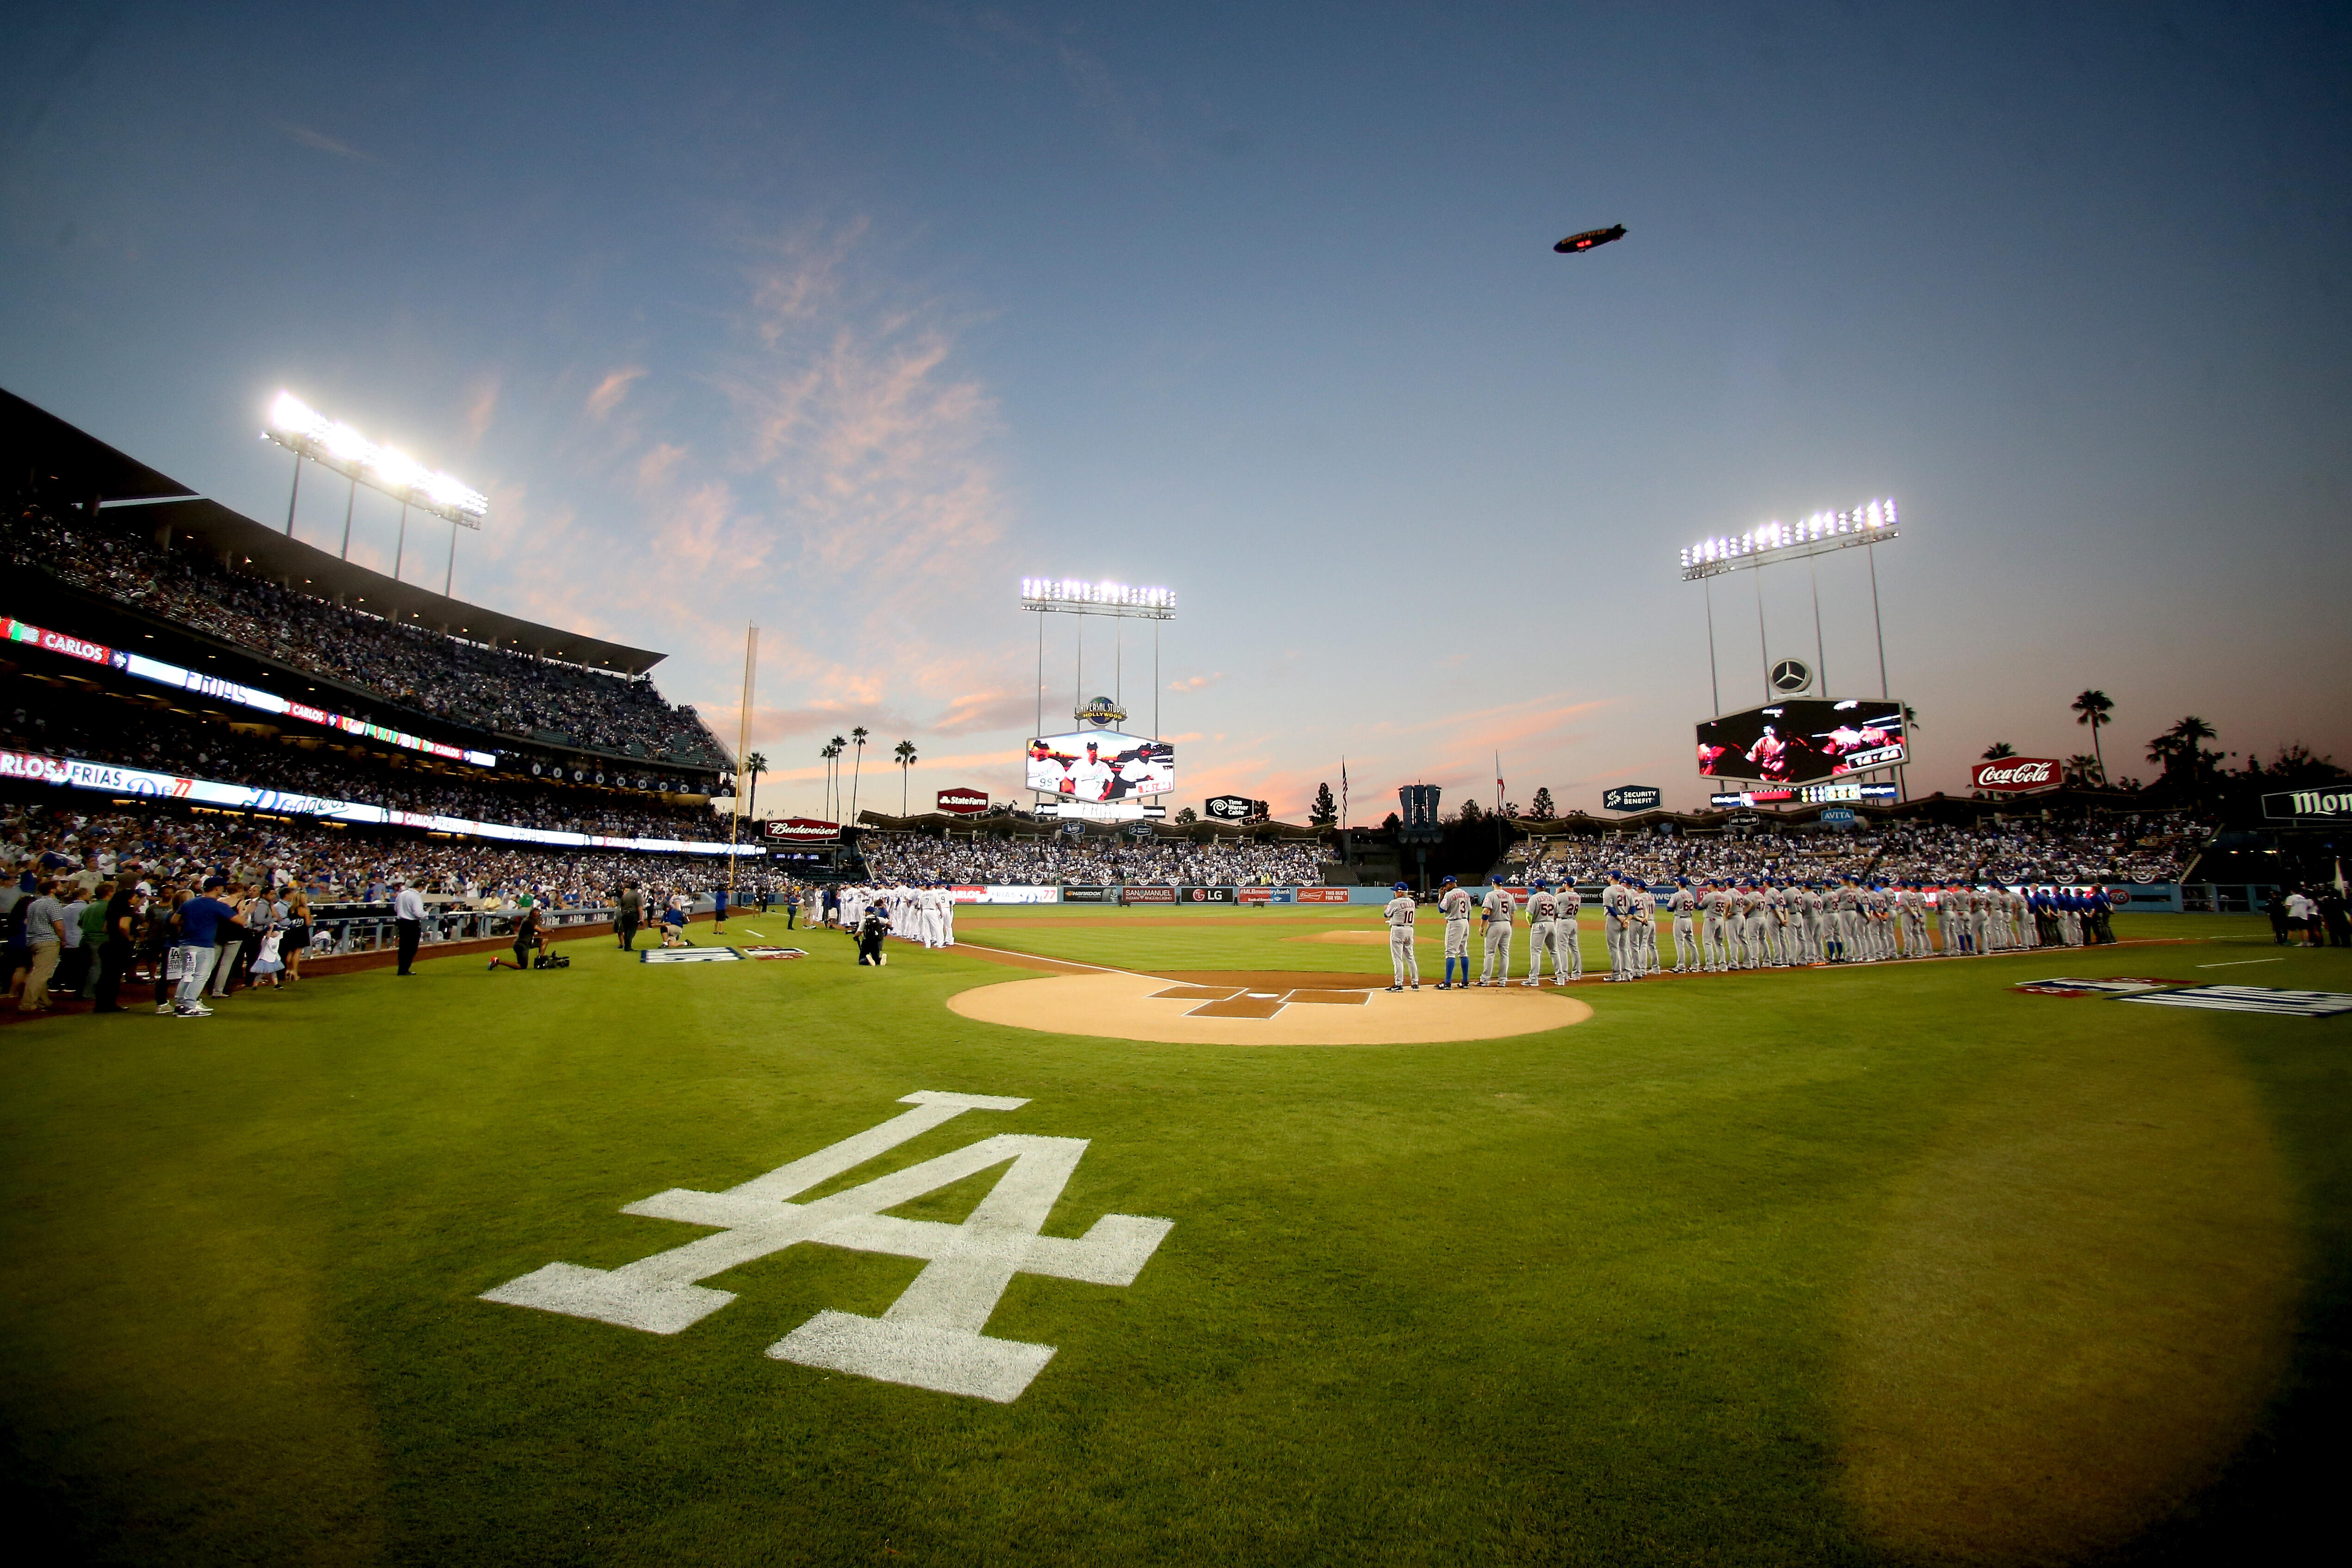 LOS ANGELES, CA - OCTOBER 09:  A general view during player introductions before game one of the National League Division Series between the Los Angeles Dodgers and the New York Mets at Dodger Stadium on October 9, 2015 in Los Angeles, California.  (Photo